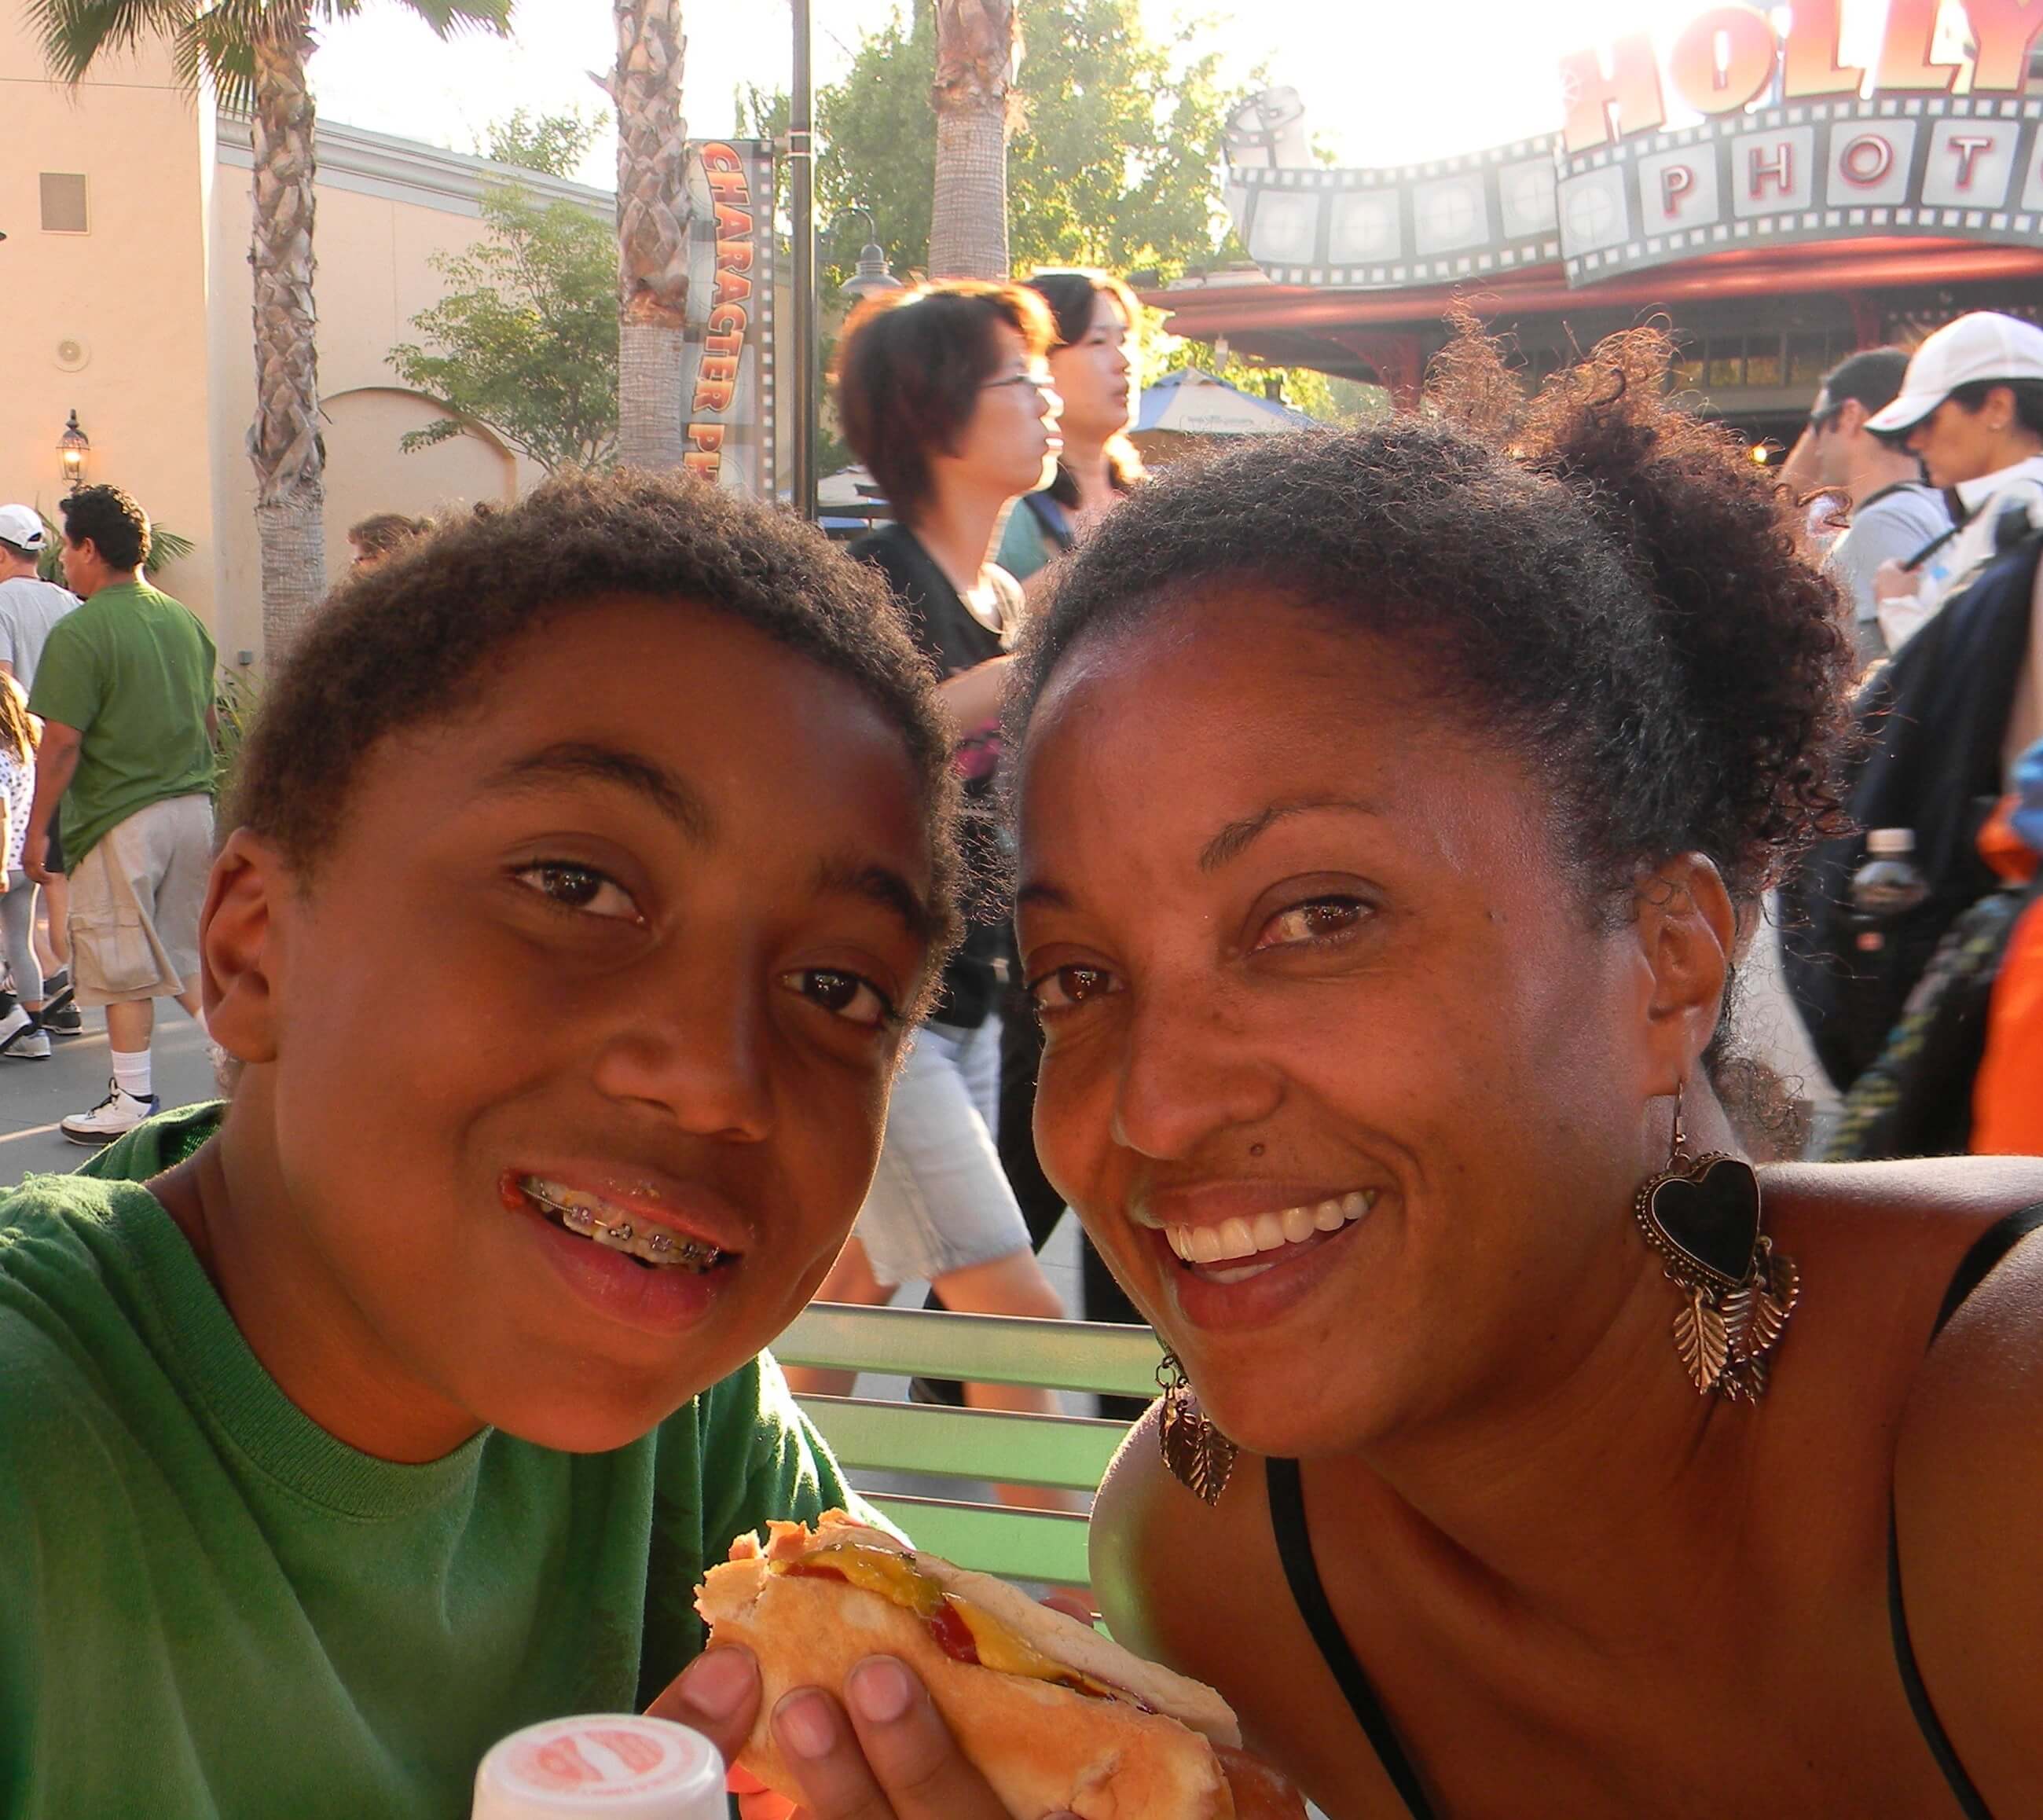 Breaking The Adult Rules: 4 Lessons I Learned From A Trip With My Son